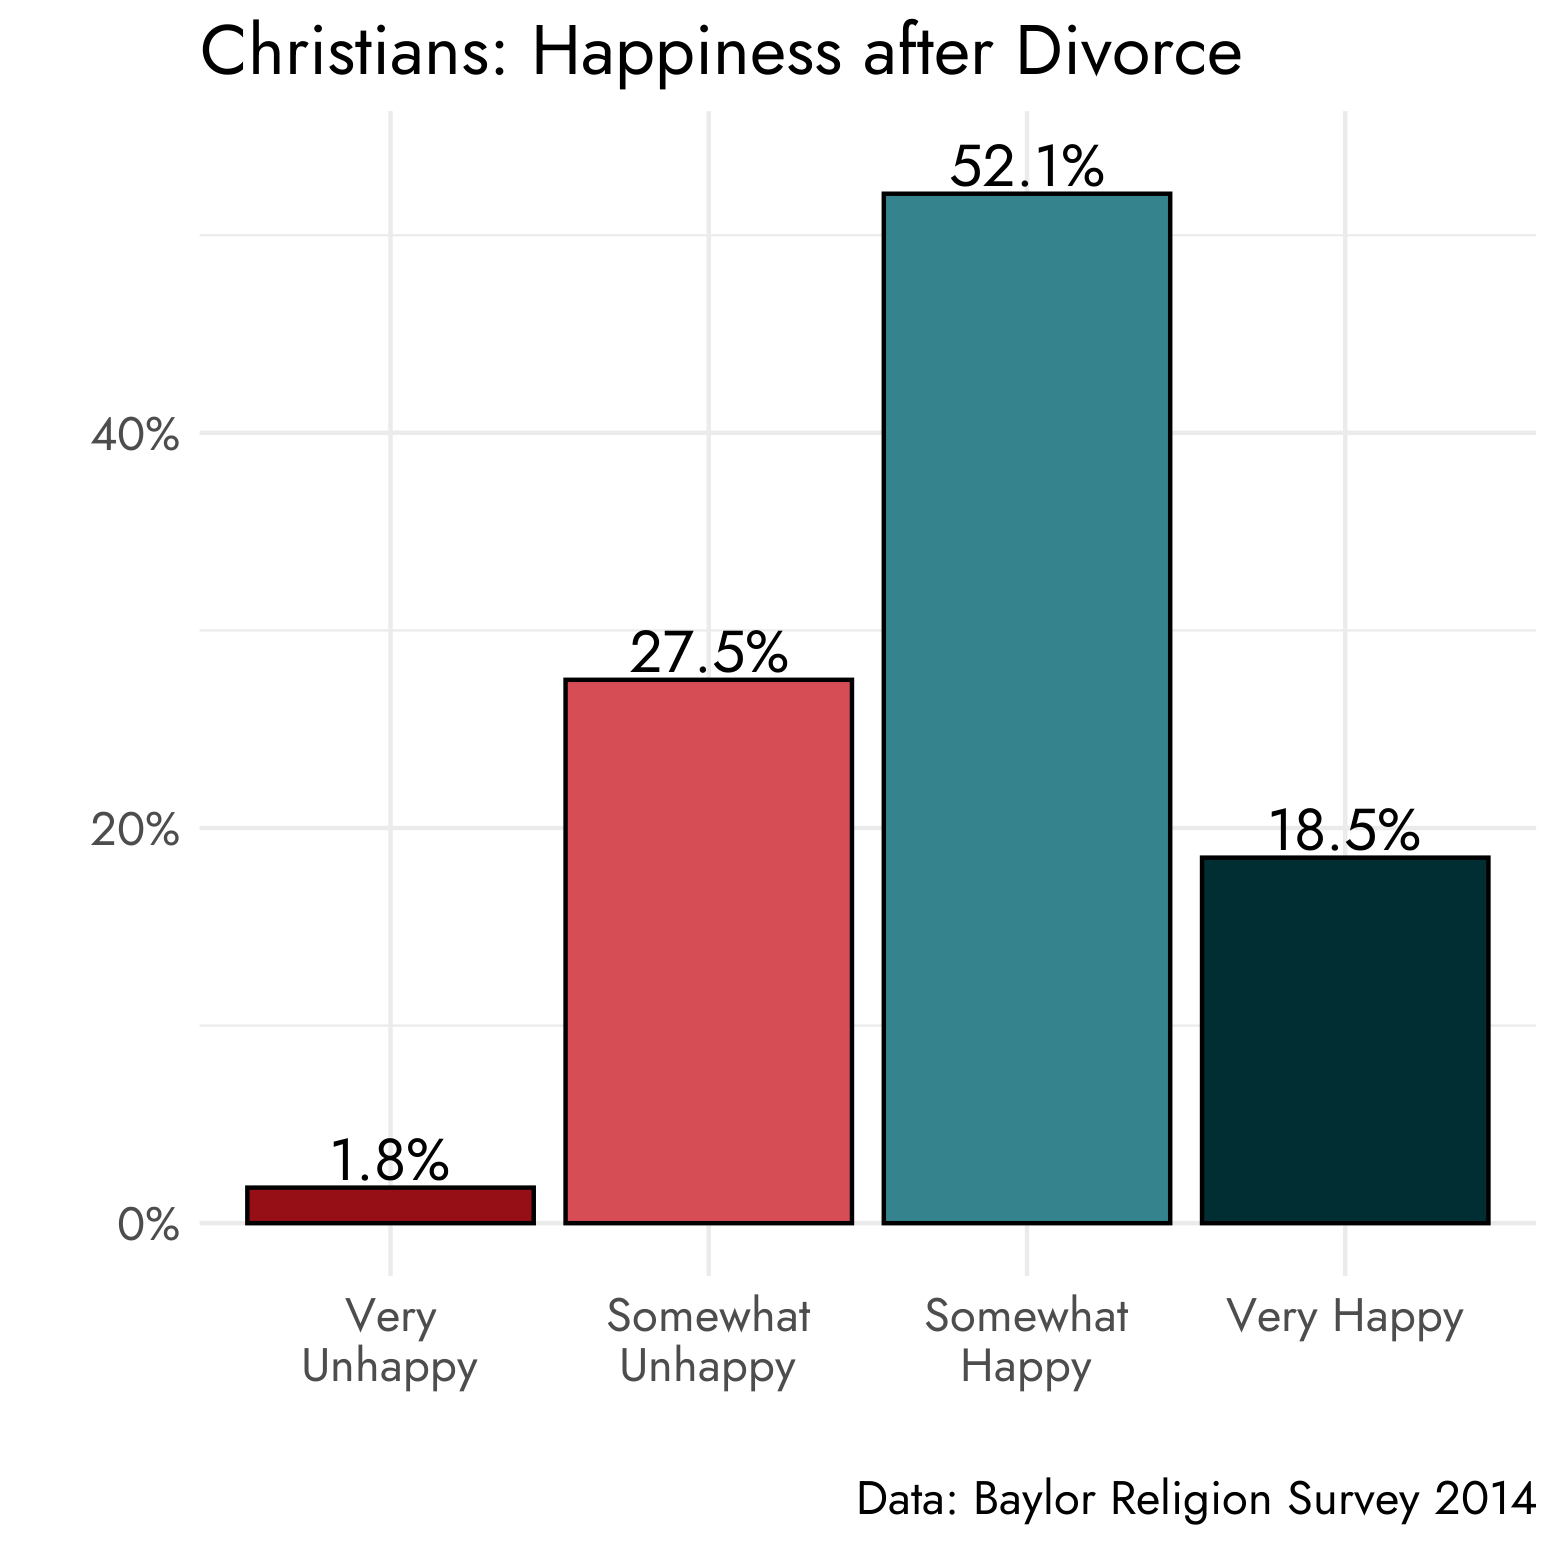 7 in 10 Chrisitans reported they were happy after divorce according to the Baylor Religion Survey 2014 data
